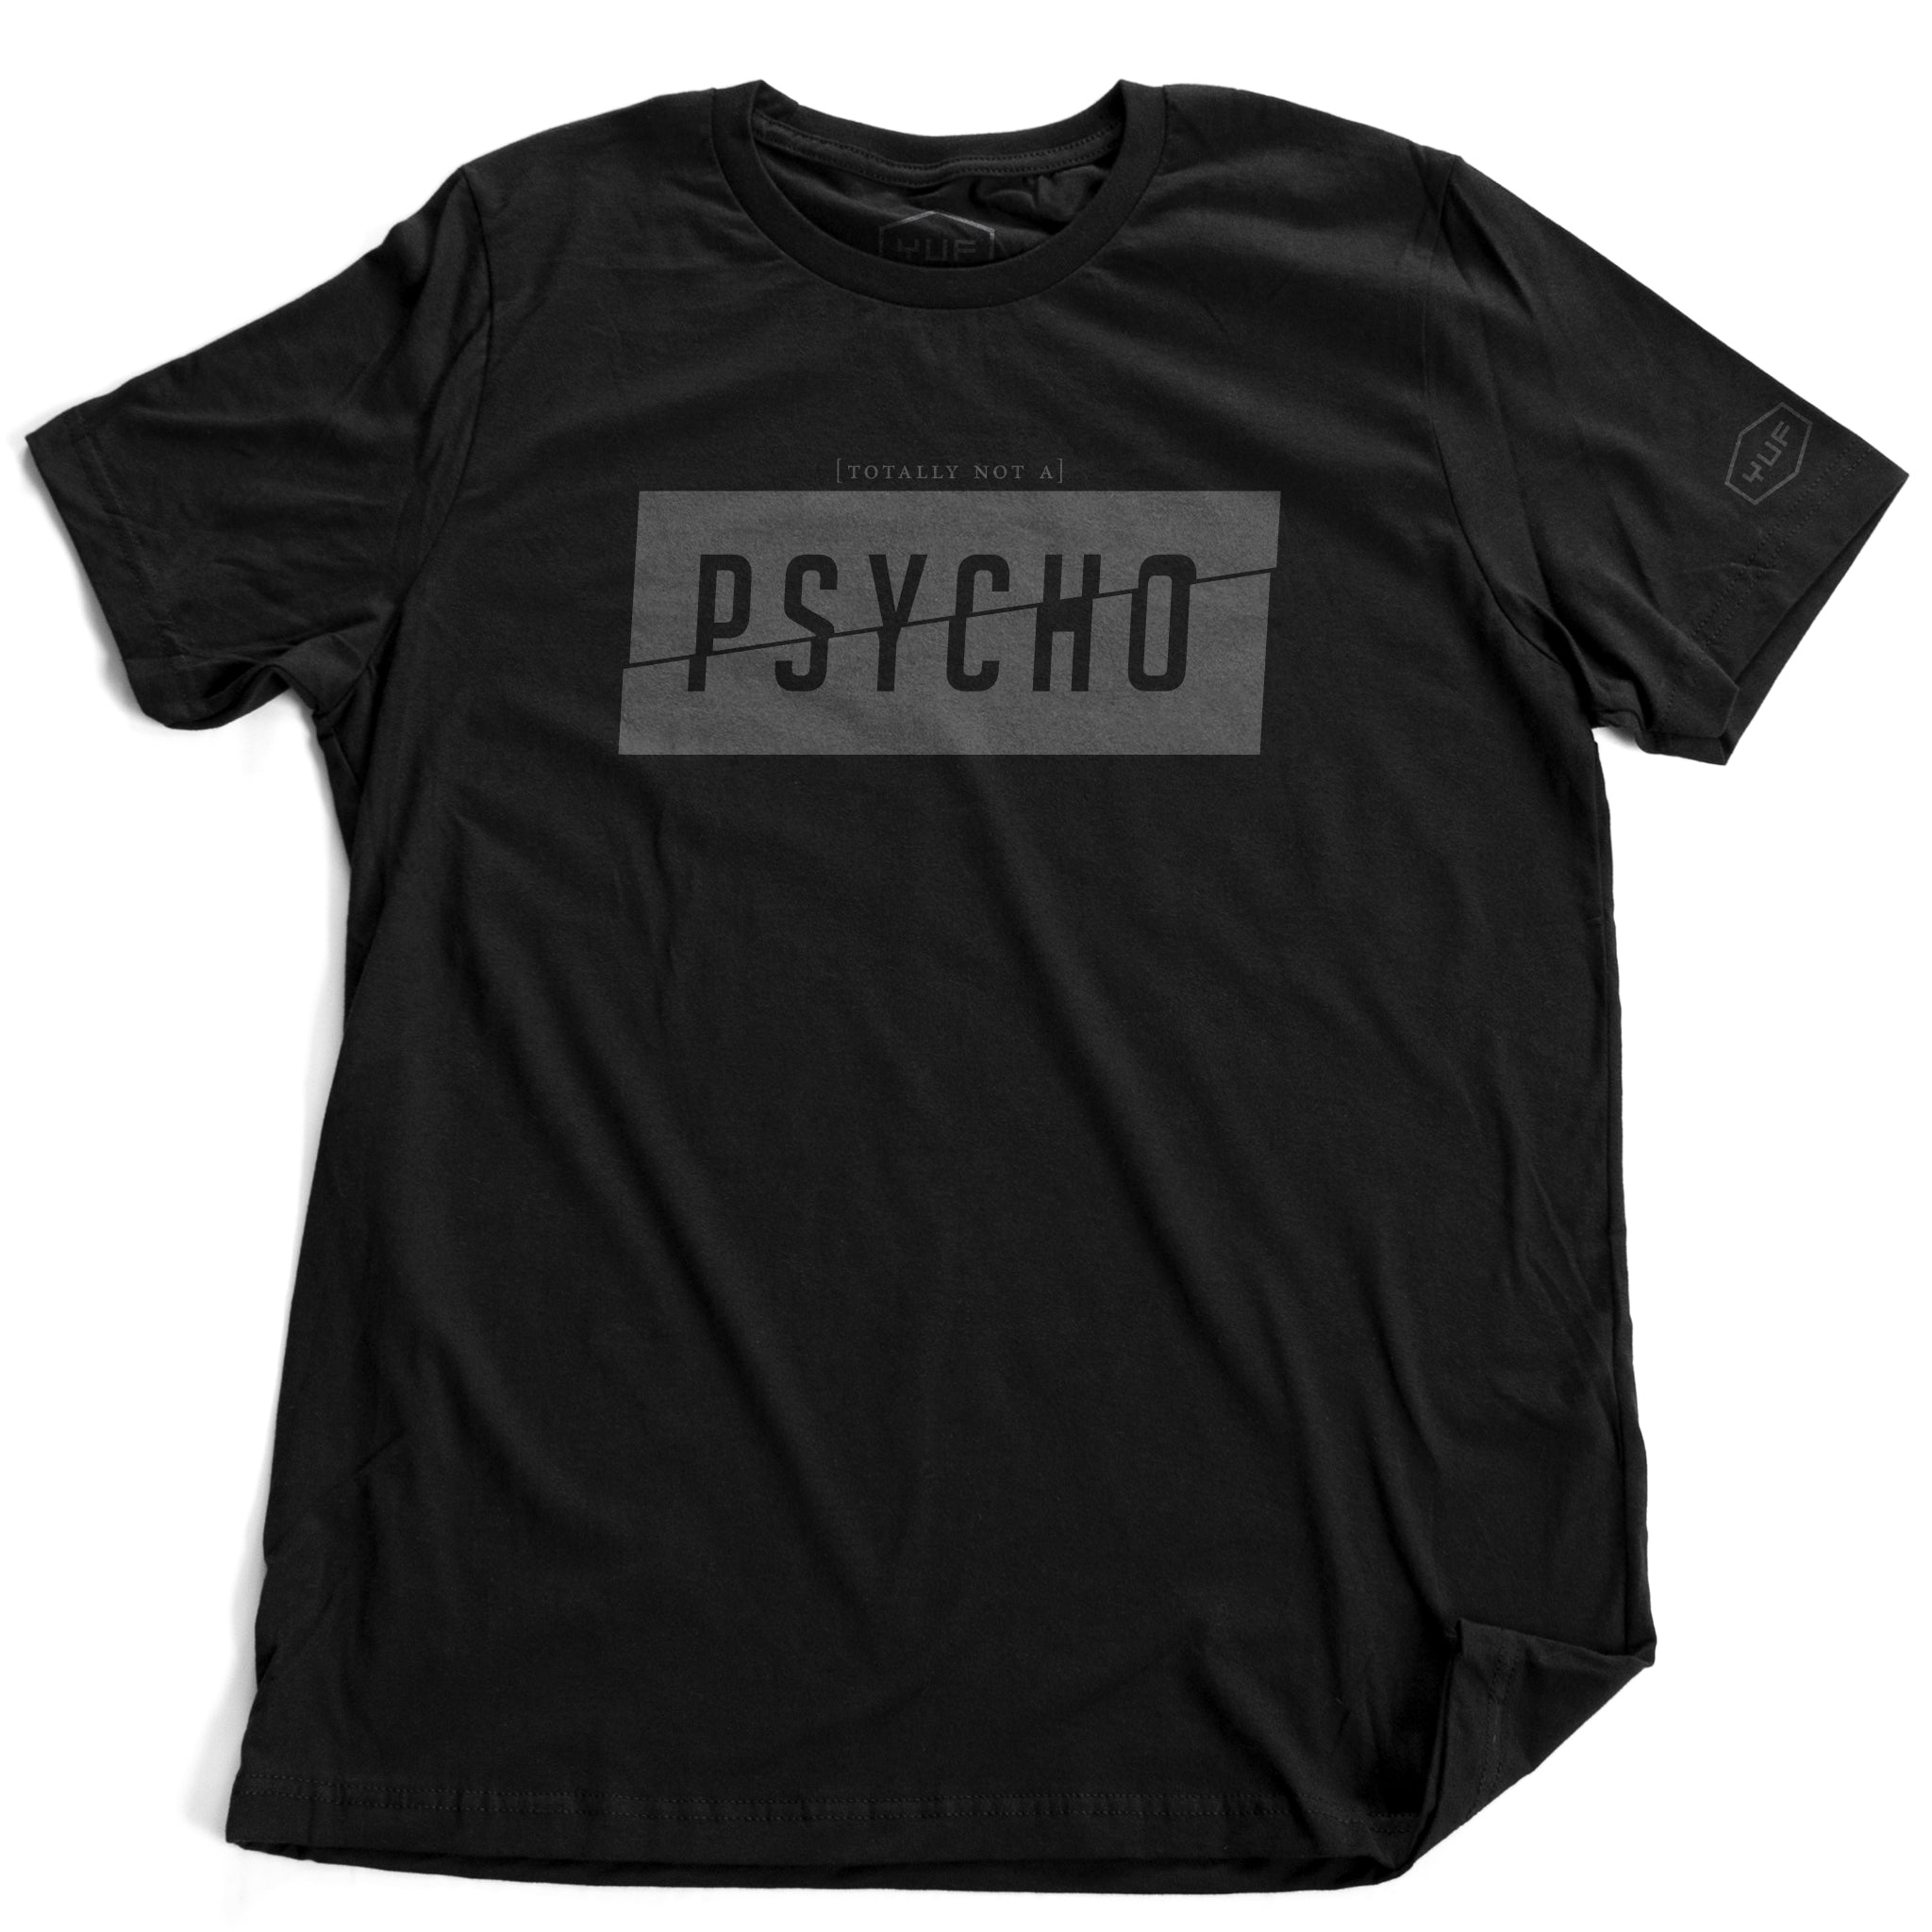 A sarcastic fashion t-shirt in black, featuring a graphic with the word “PSYCHO” split in half diagonally, within a rectangle, to represent a ‘fractured’ personality. Above the box are the words “totally not a...” in a much smaller font. From fashion brand YUF, available on wolfsaint.net